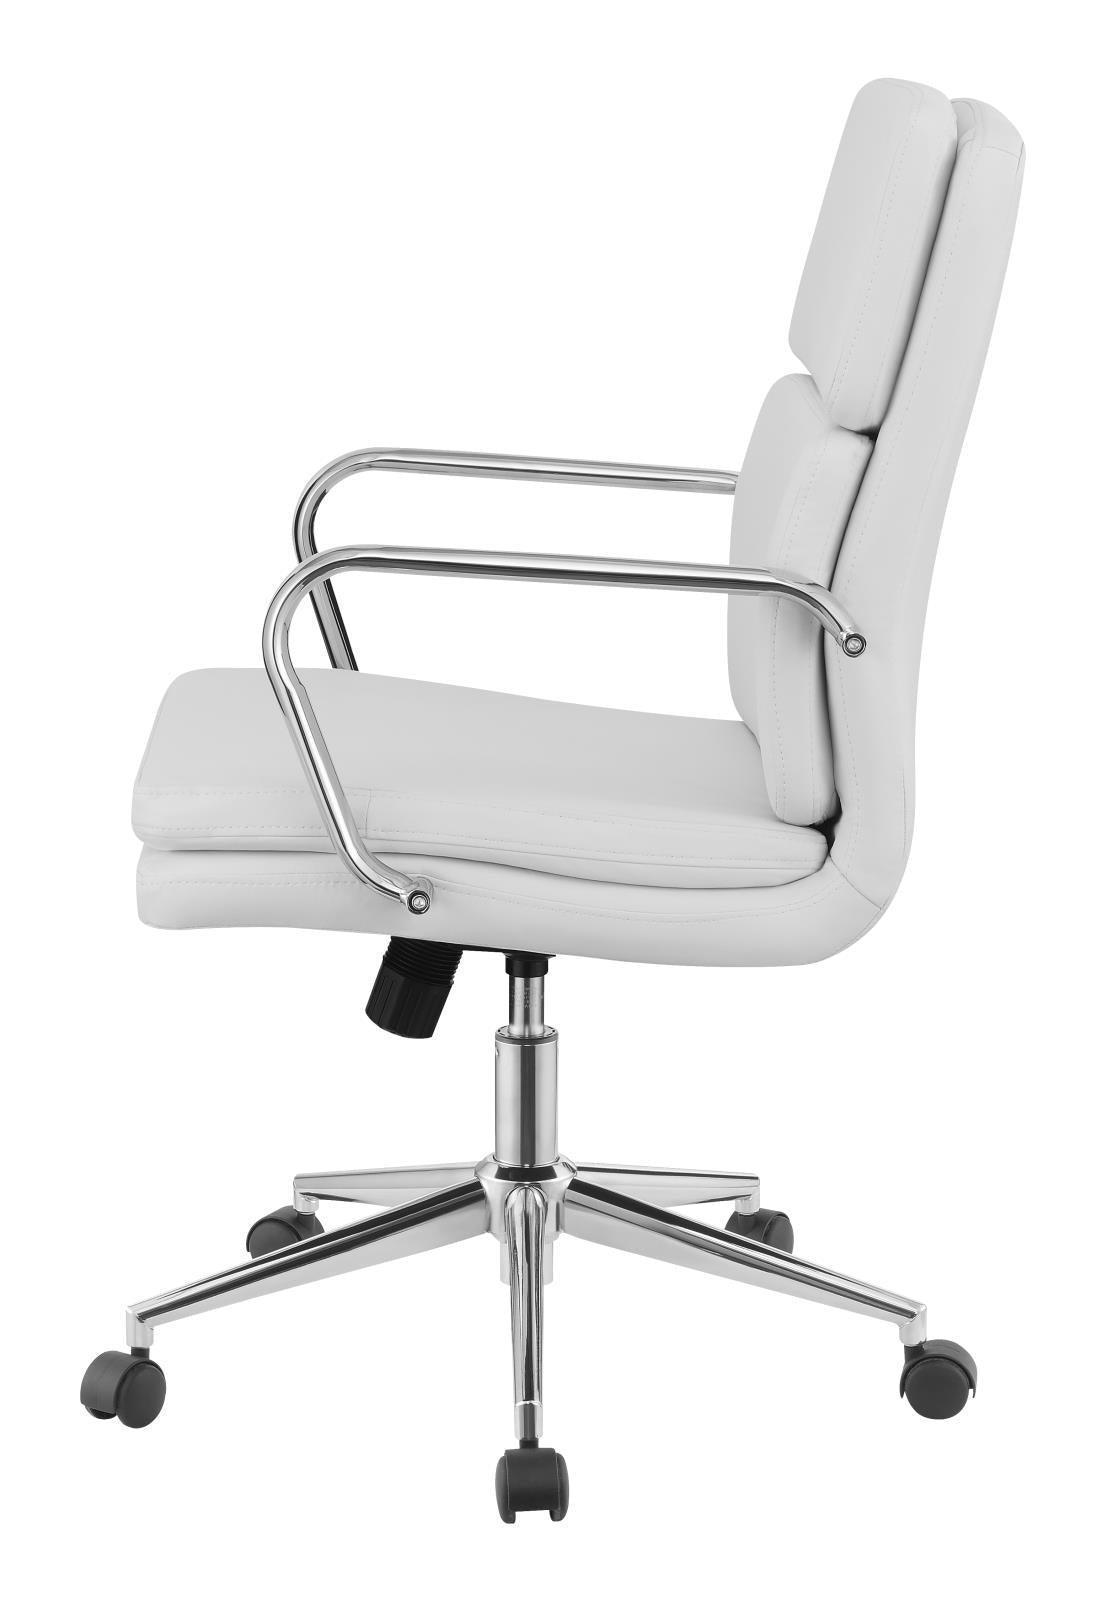 White Upholstered Office Chair 801767 - Ella Furniture